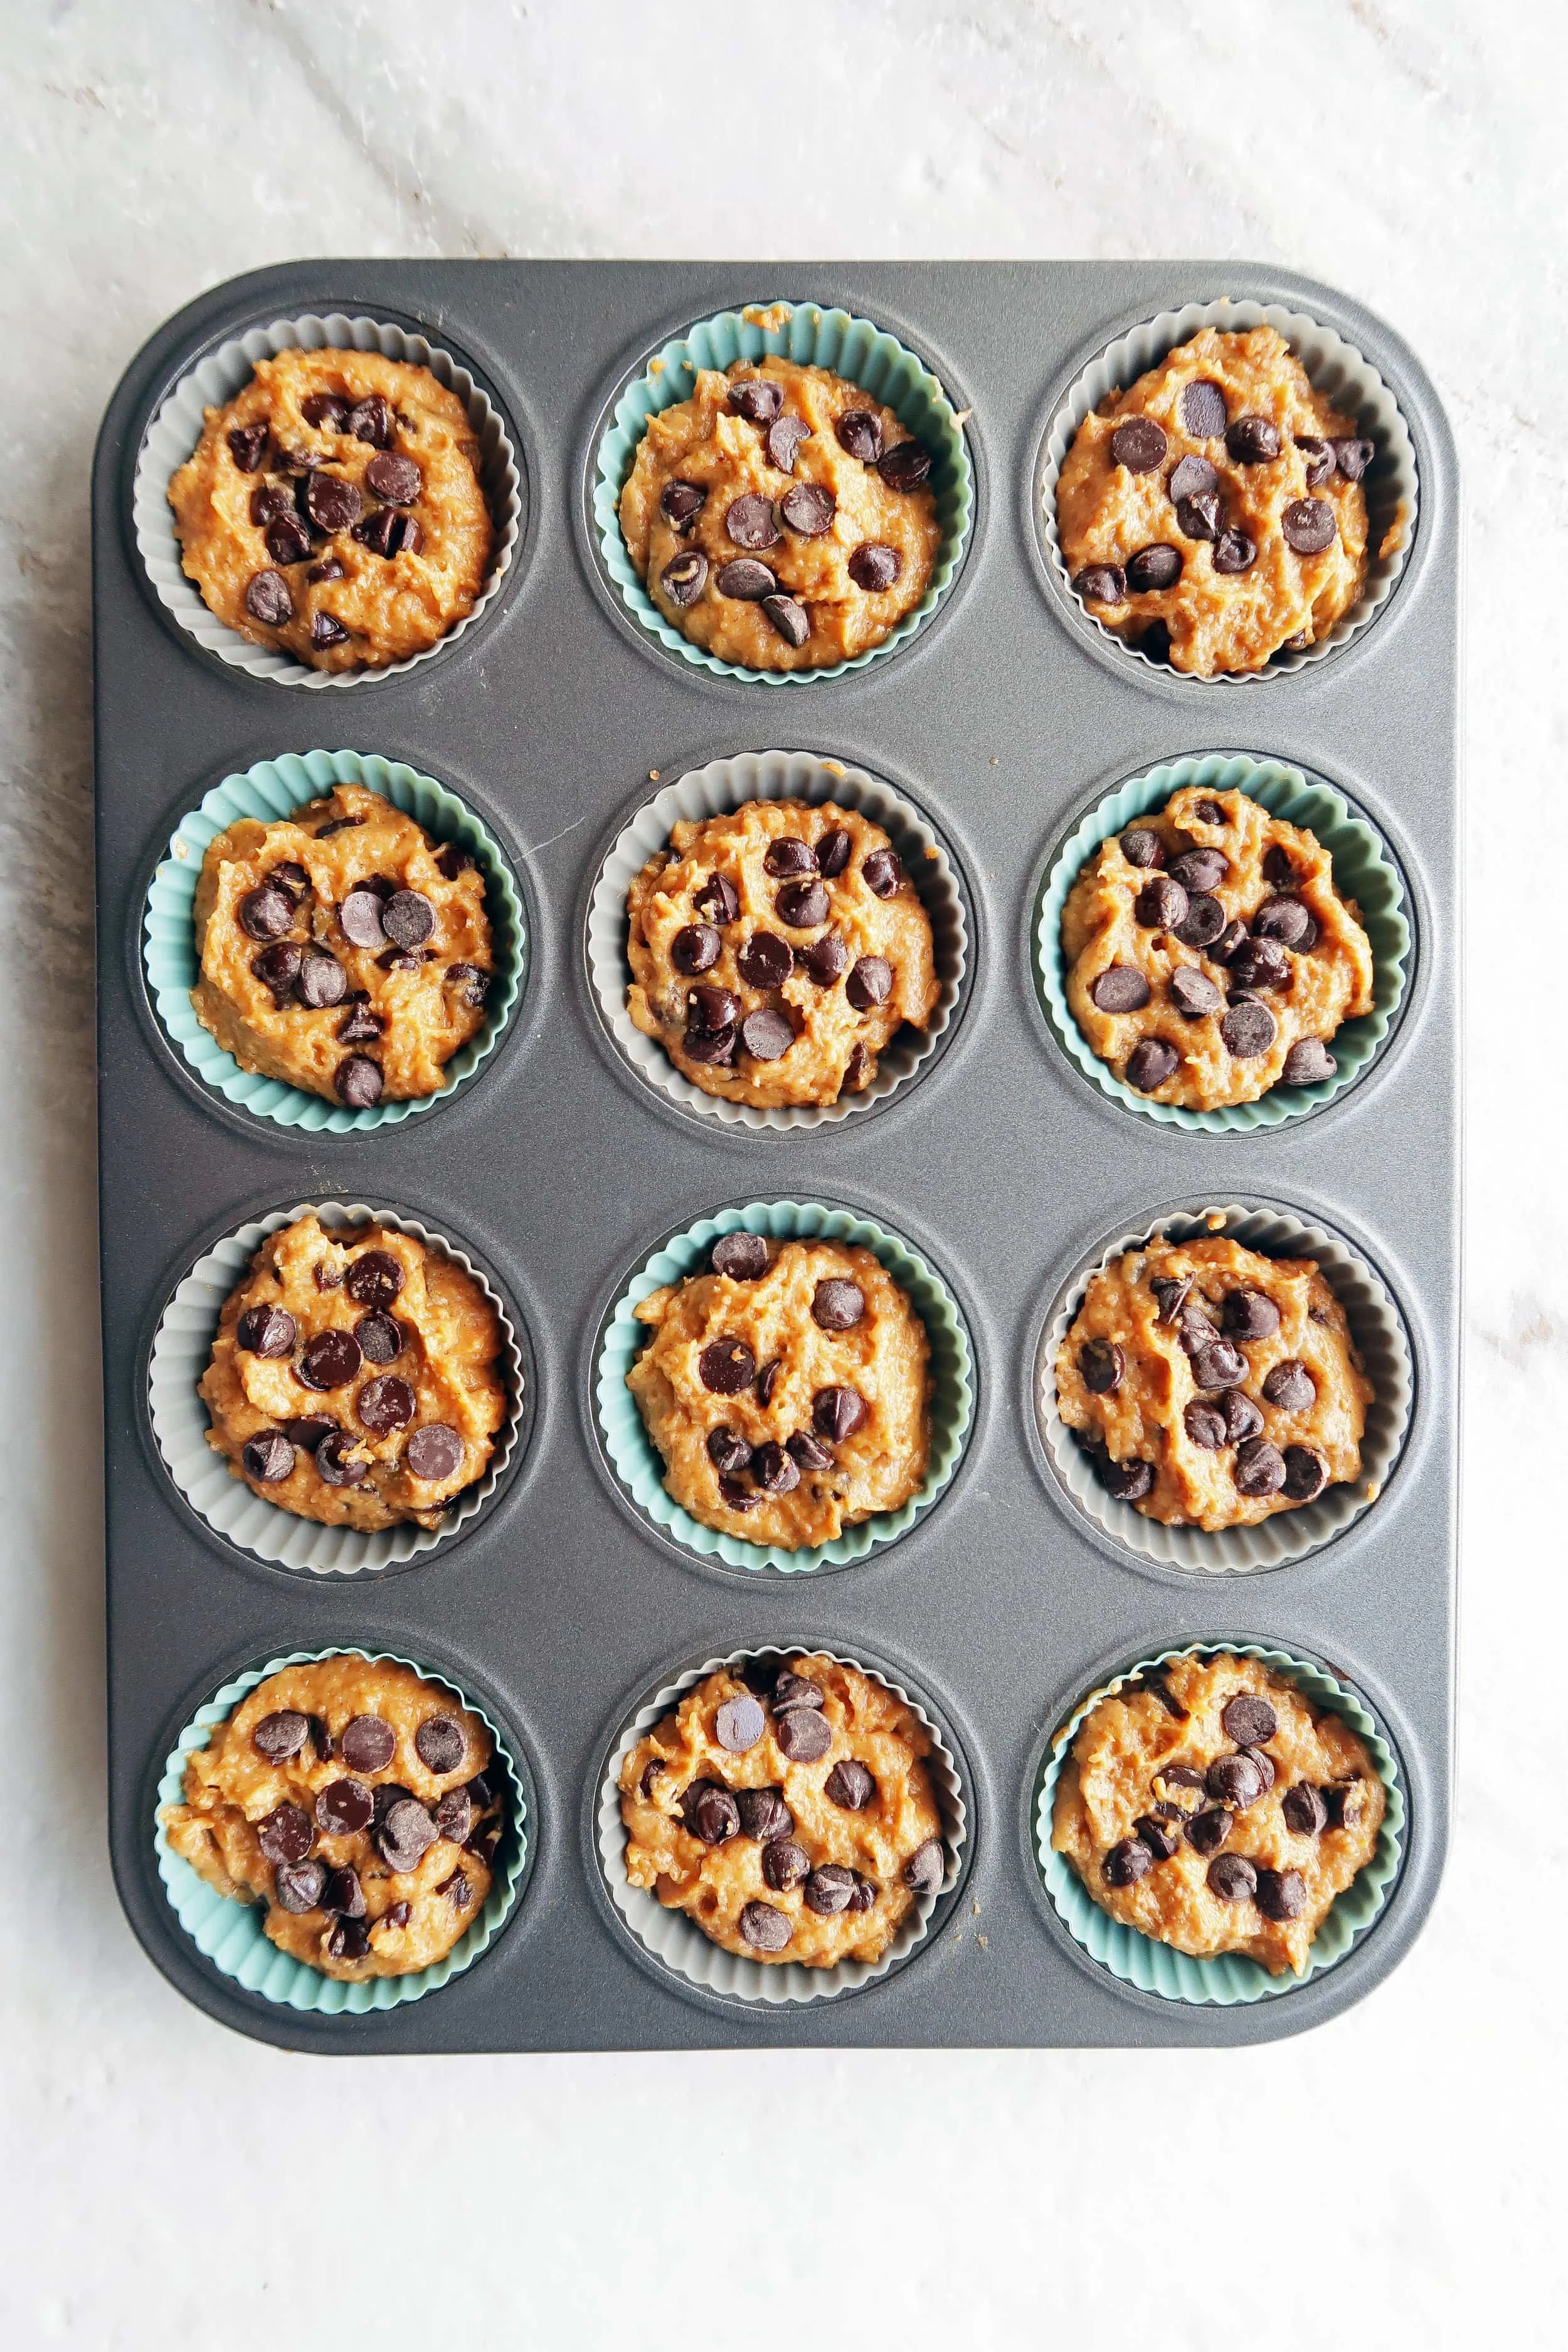 Pumpkin chocolate chip whole wheat muffin batter scooped evenly into a 12 cup muffin pan.